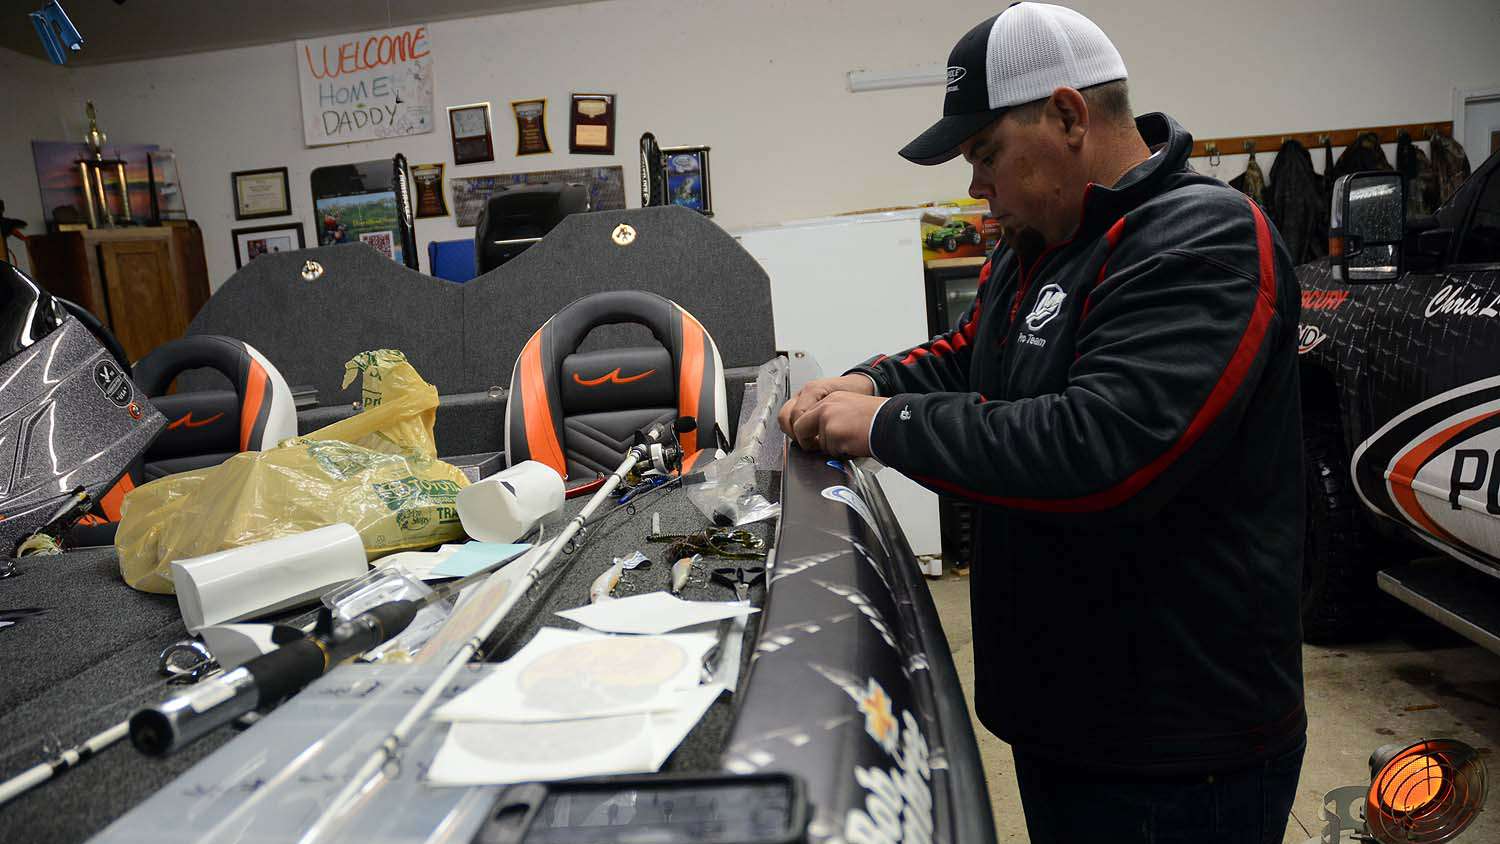 Lane gets busy putting the final touches on his new boat. There are minor details needing attention outside the final factory rigging job of his Legend rig. Tending to rods, reels and unpacking the familiar shopping bag from a Bass Pro Shops Outdoor World will have to wait. 